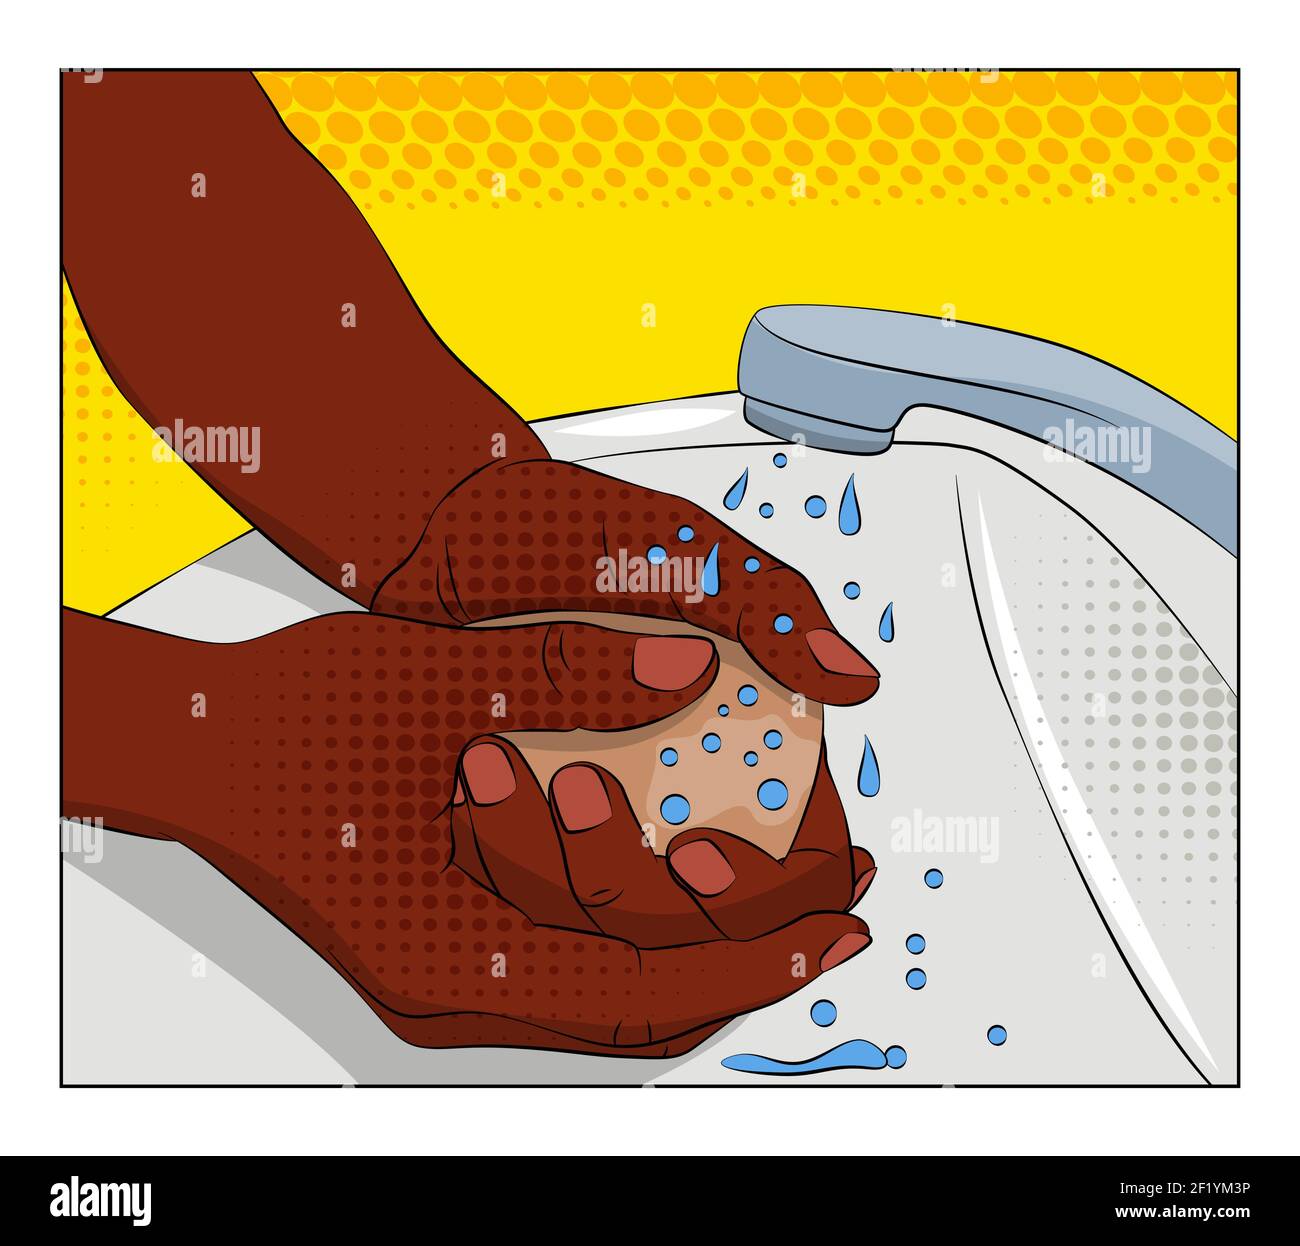 Black African person washing hand with soap. Comic book style illustration with colorful background. Washing hands in a sink, disinfection. Hygiene co Stock Vector